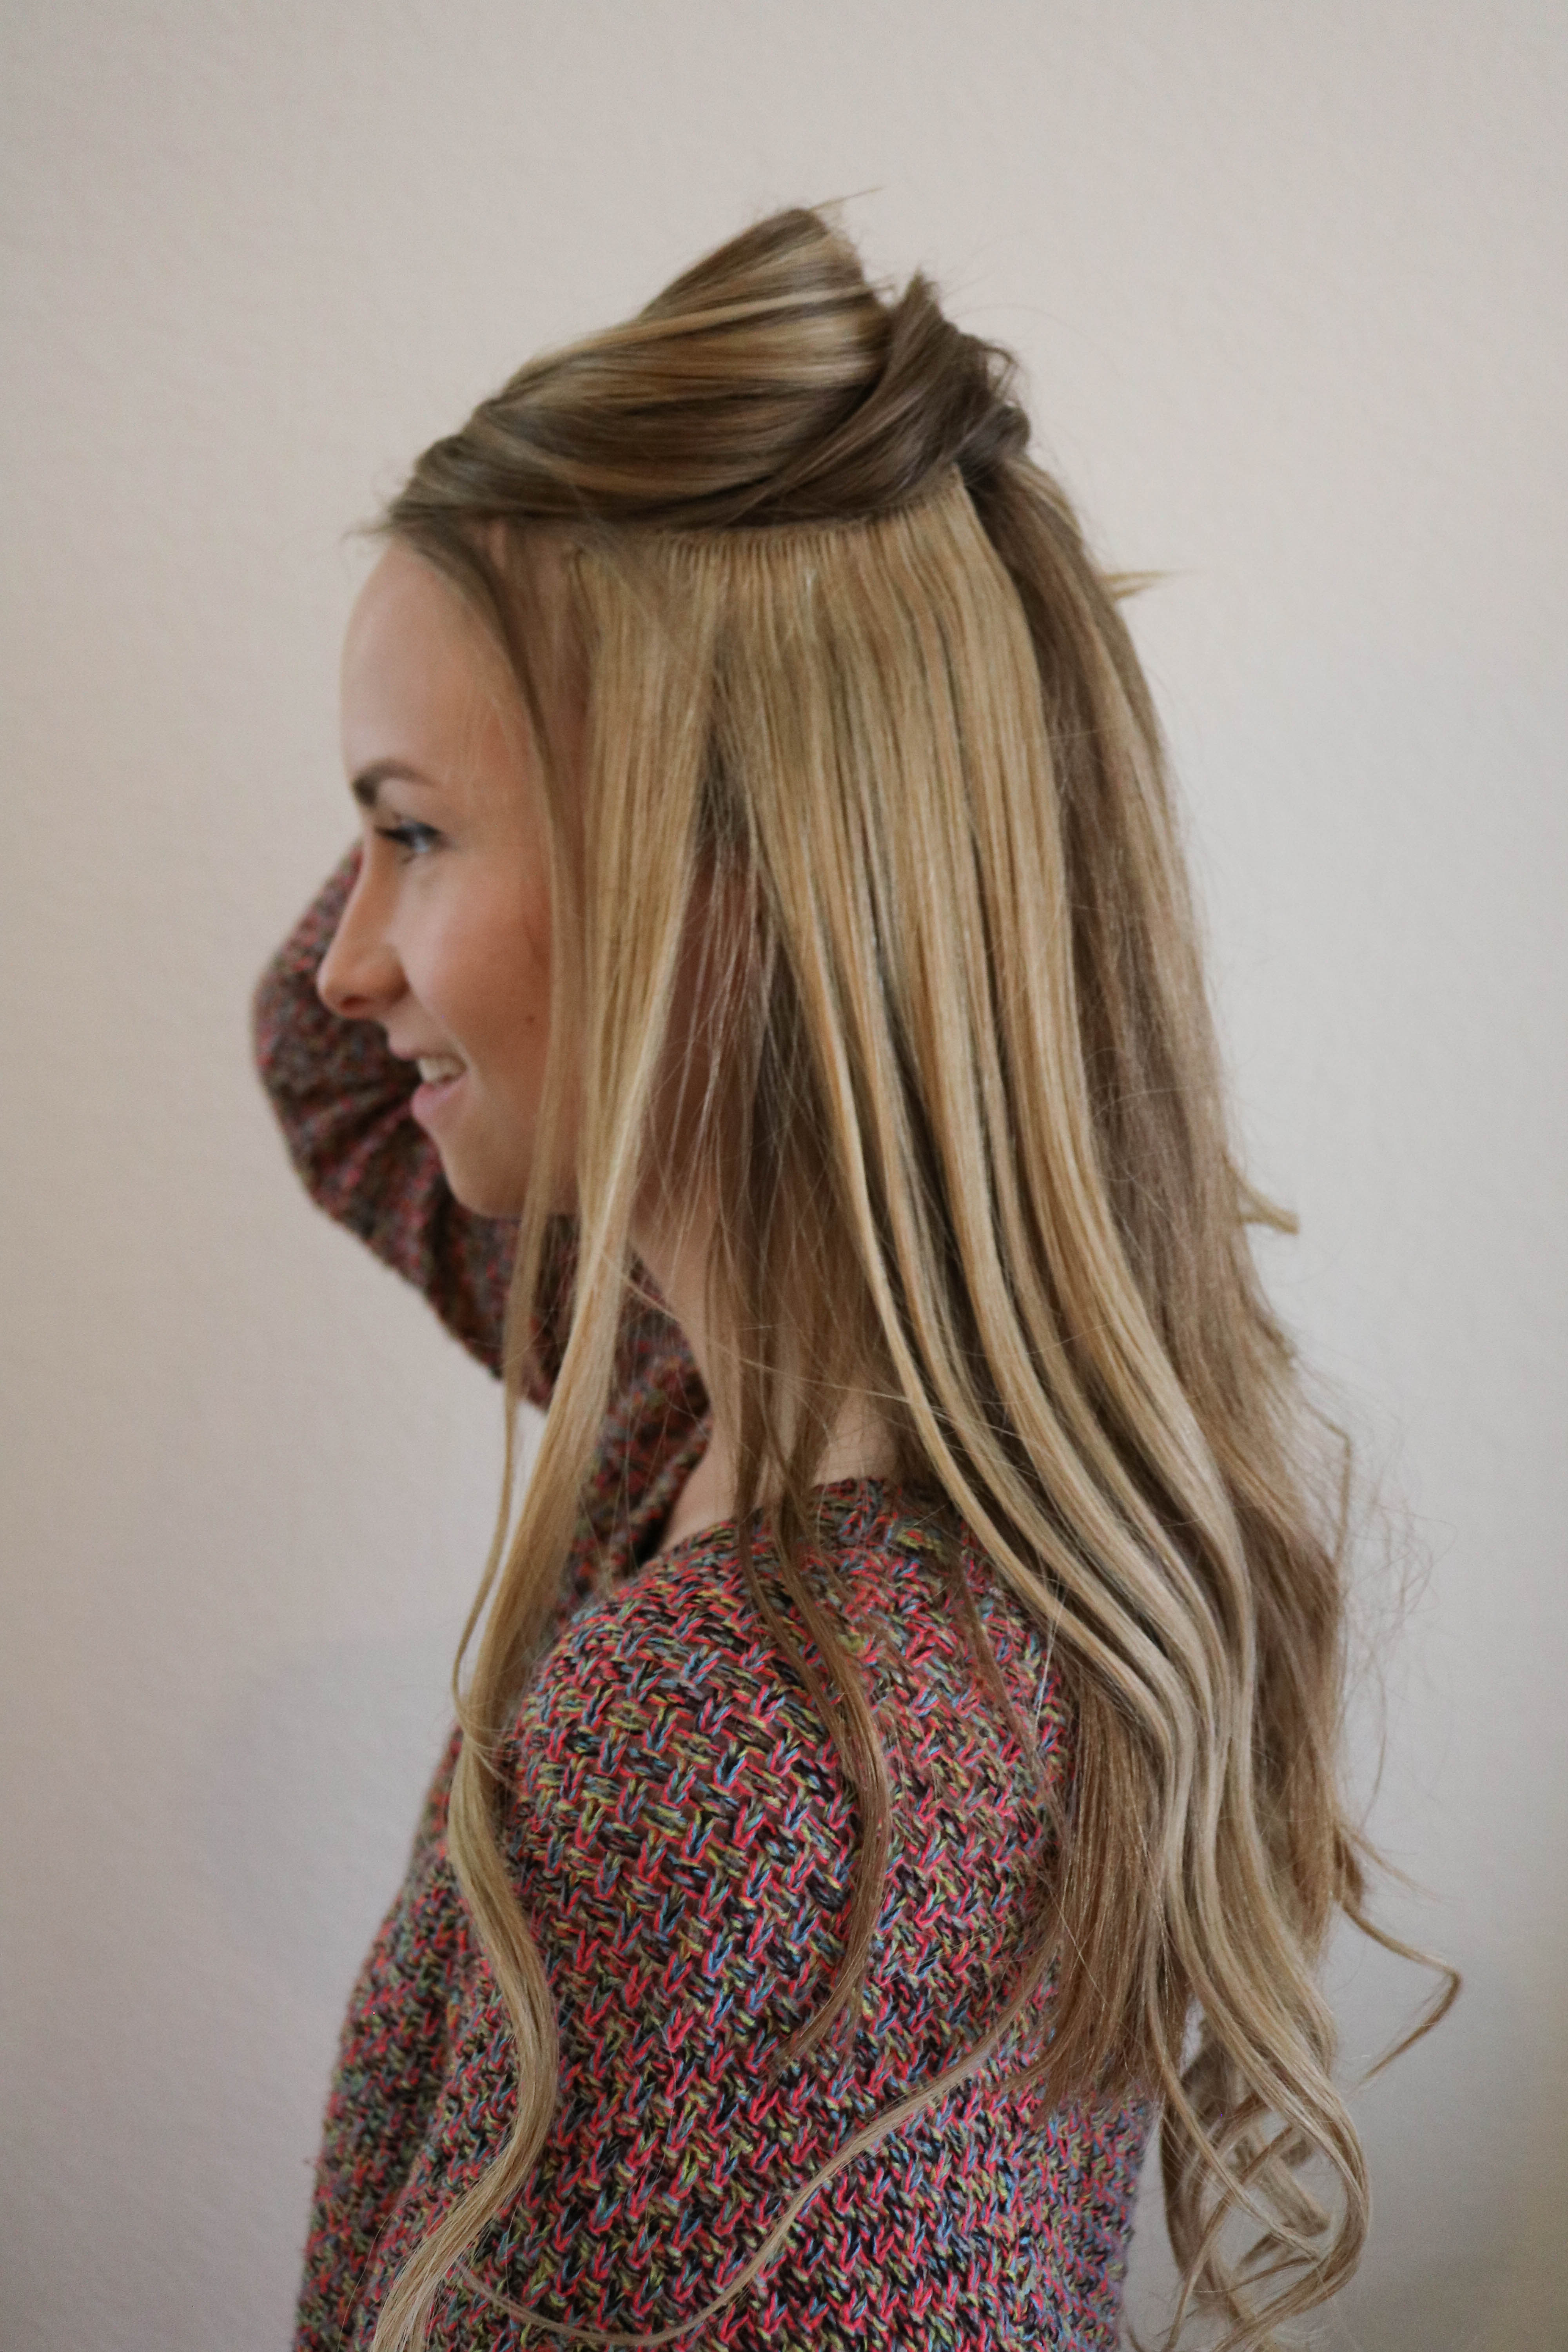 A Beginners Guide To Hair Extensions | How to put them in, what color to pick and how they will look on - The Blonder Life